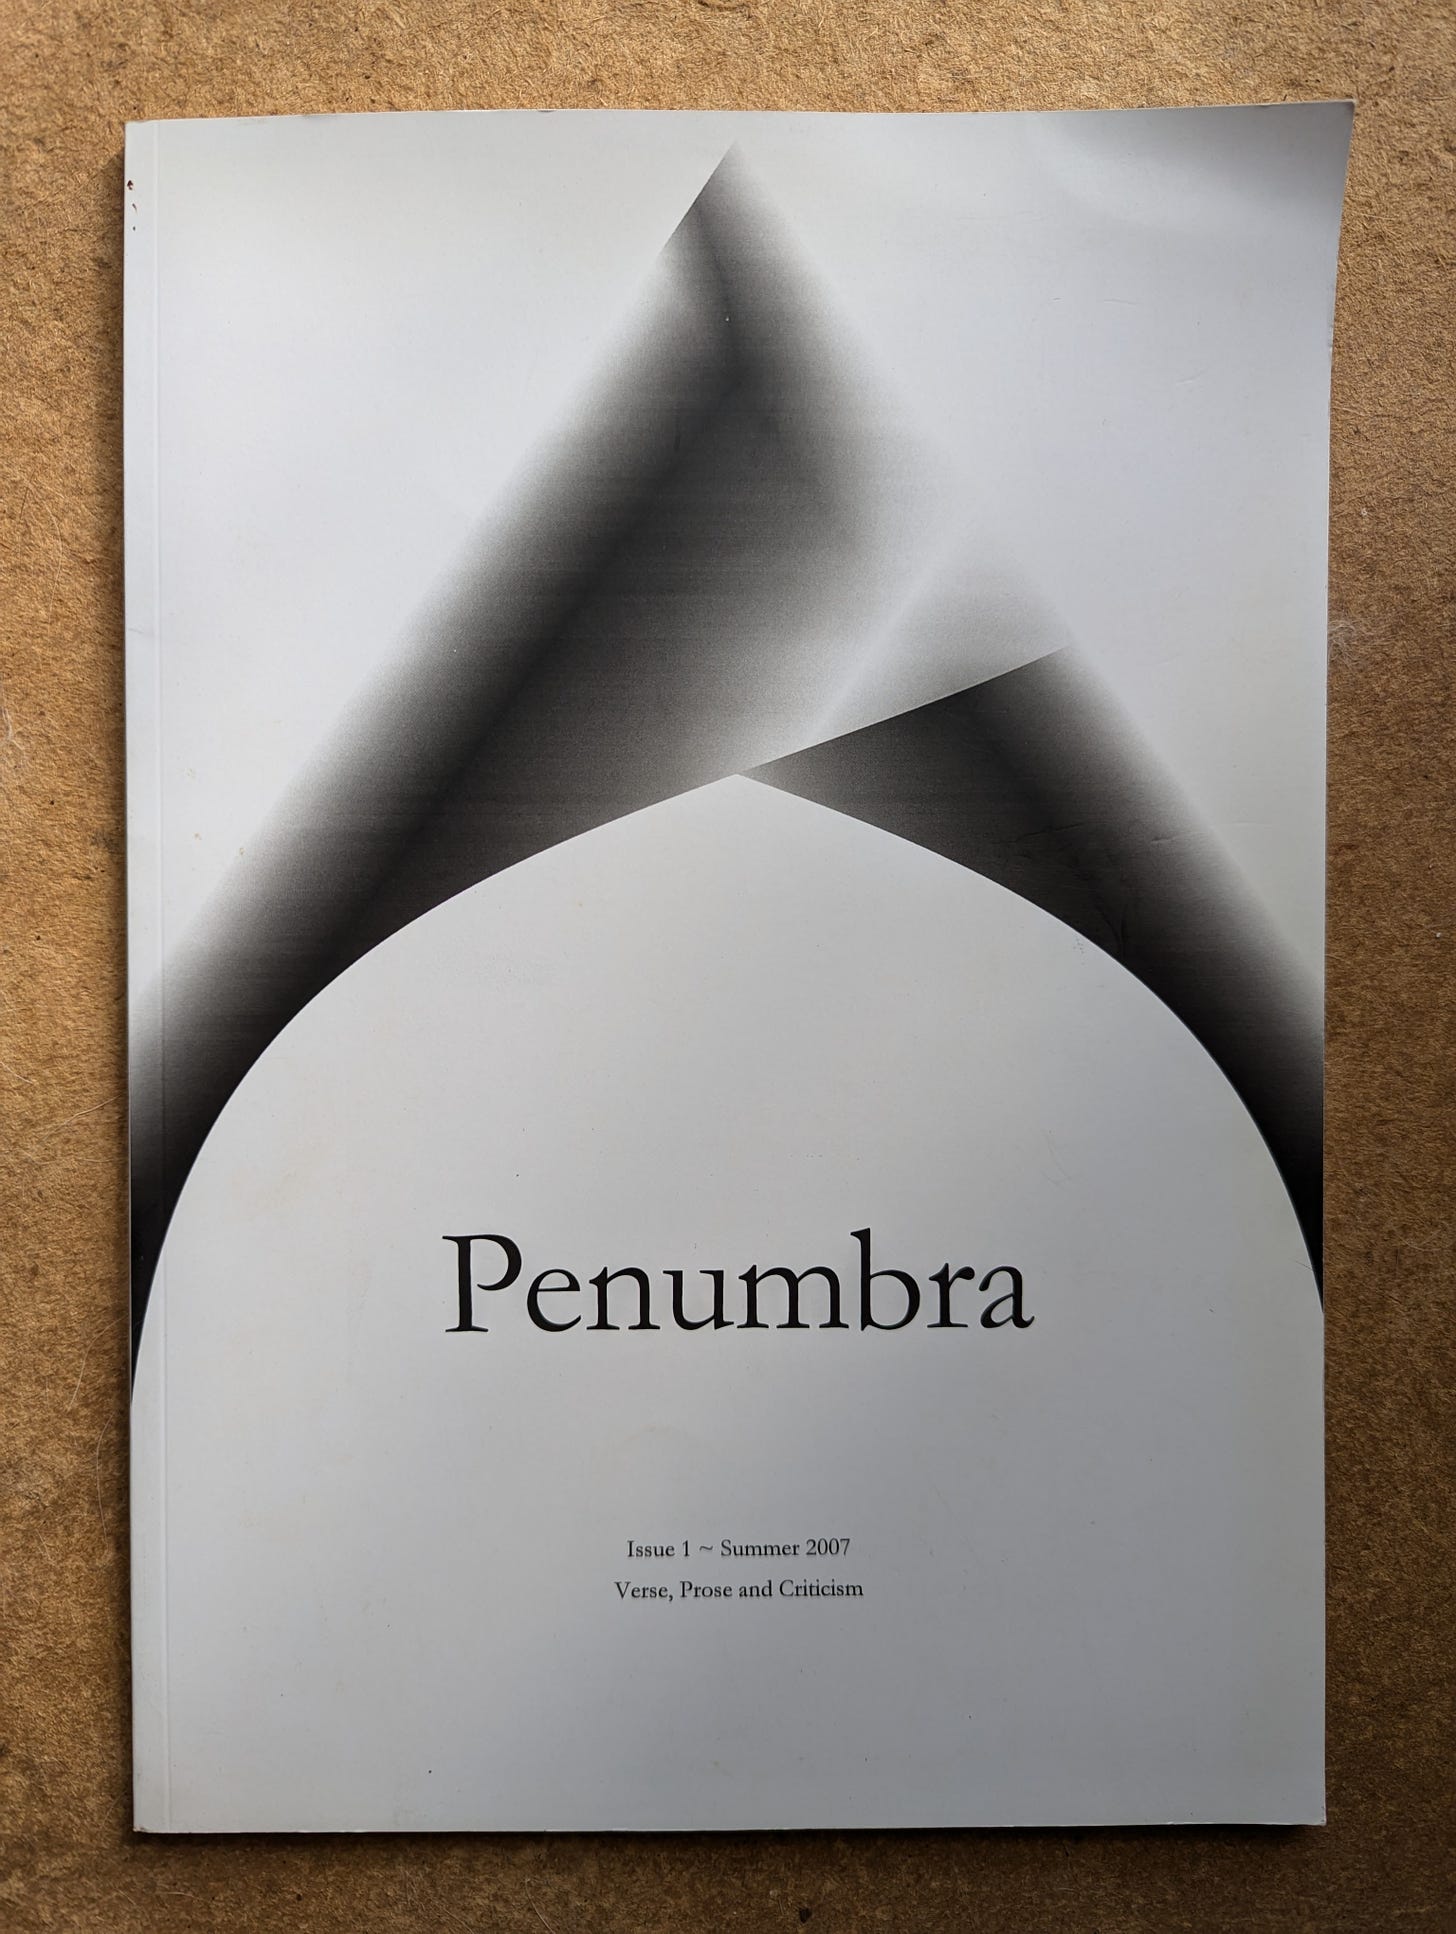 Cover of literary journal Penumbra, published in the Summer of 2007.